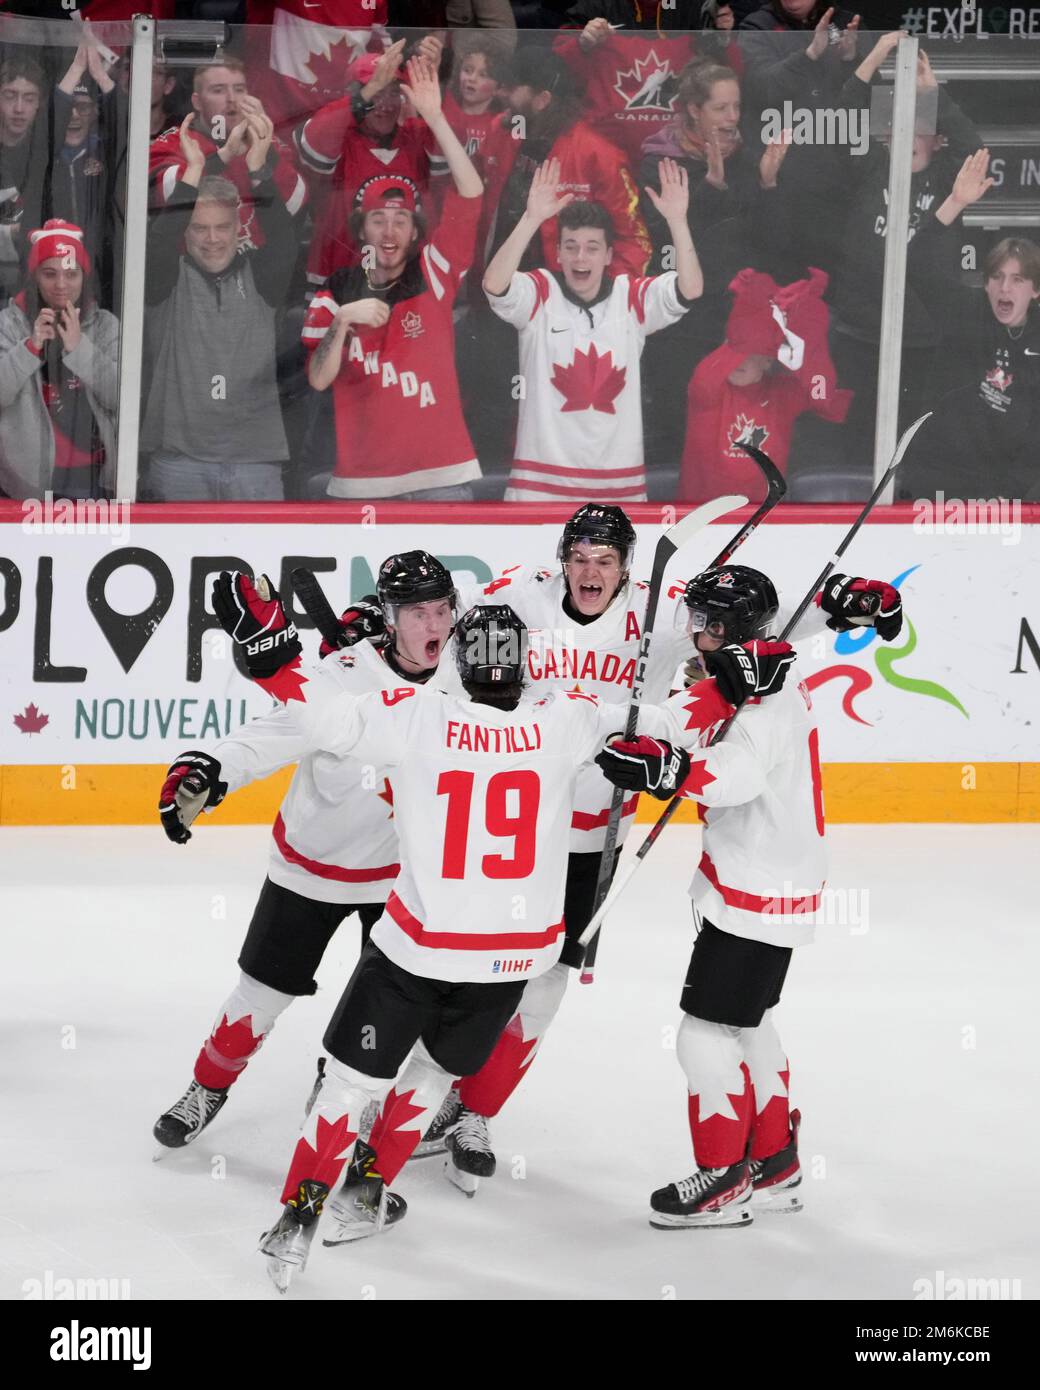 Canadas Brandt Clarke, left, celebrates his goal with teammates during third period IIHF World Junior Hockey Championship semifinal action against USA in Halifax on Wednesday, January 4, 2023